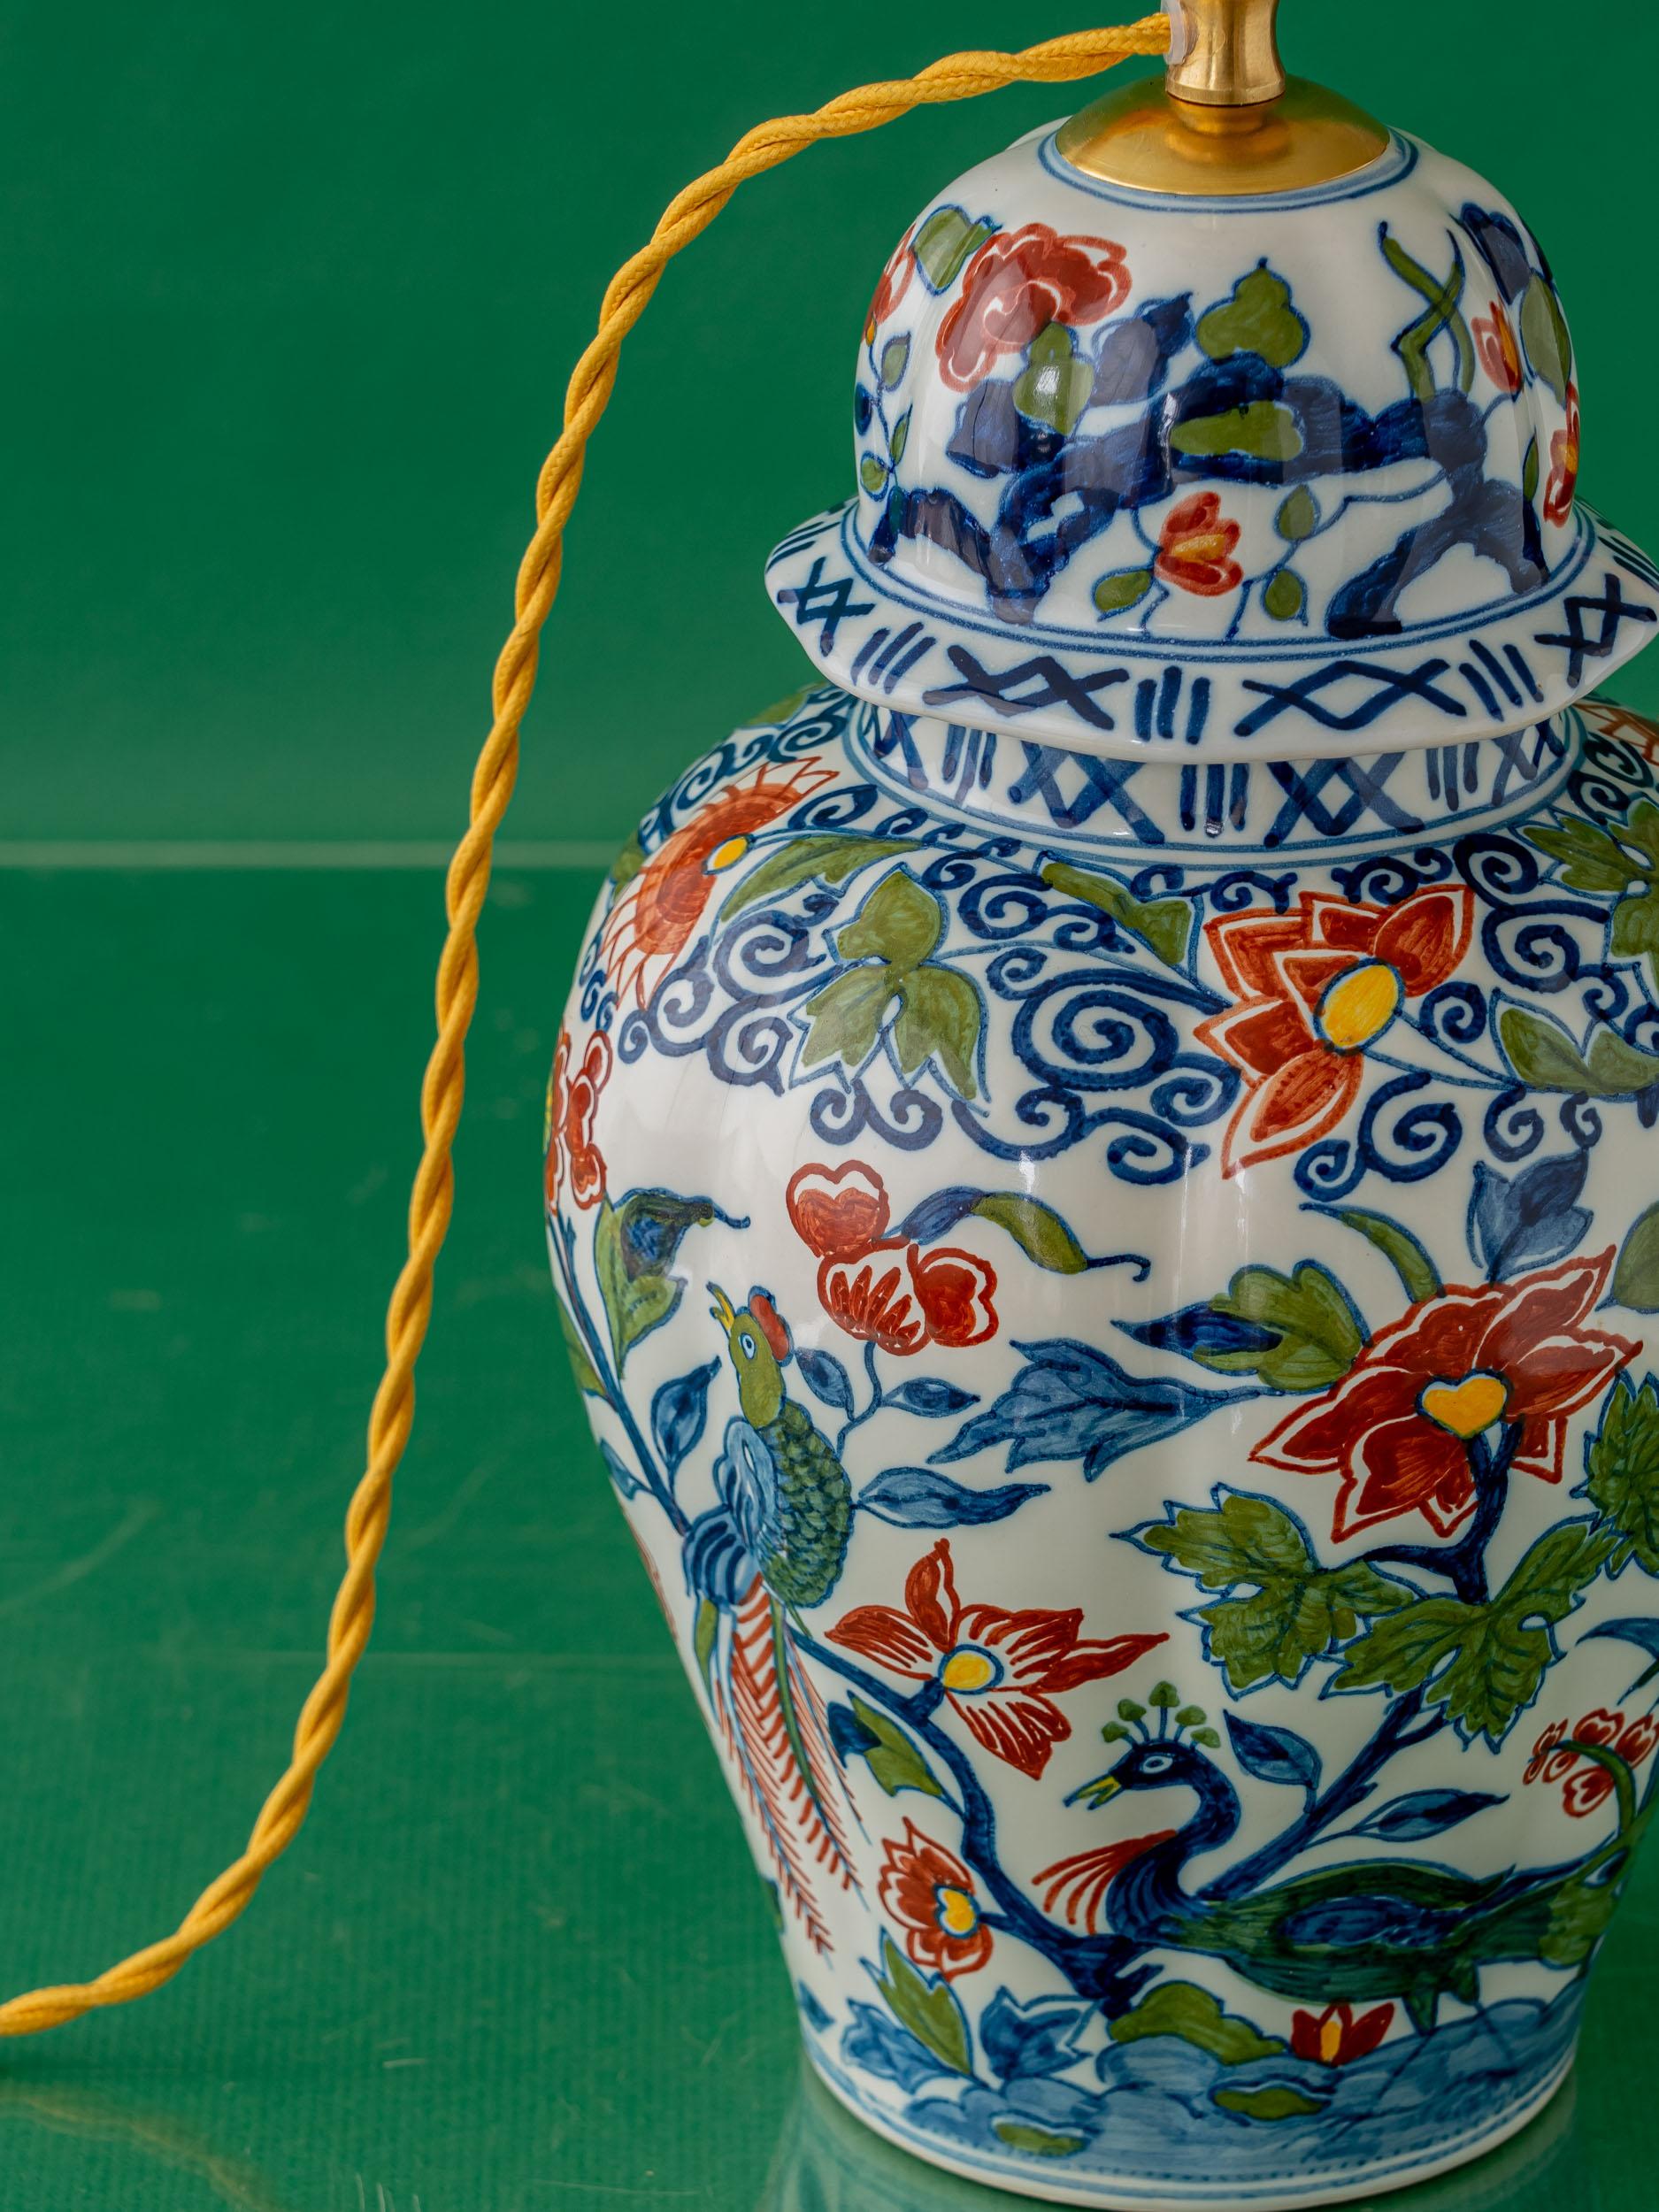 Chinoiserie Royal Tichelaar Makkum Delft Table Lamps, Hand-Painted For Sale